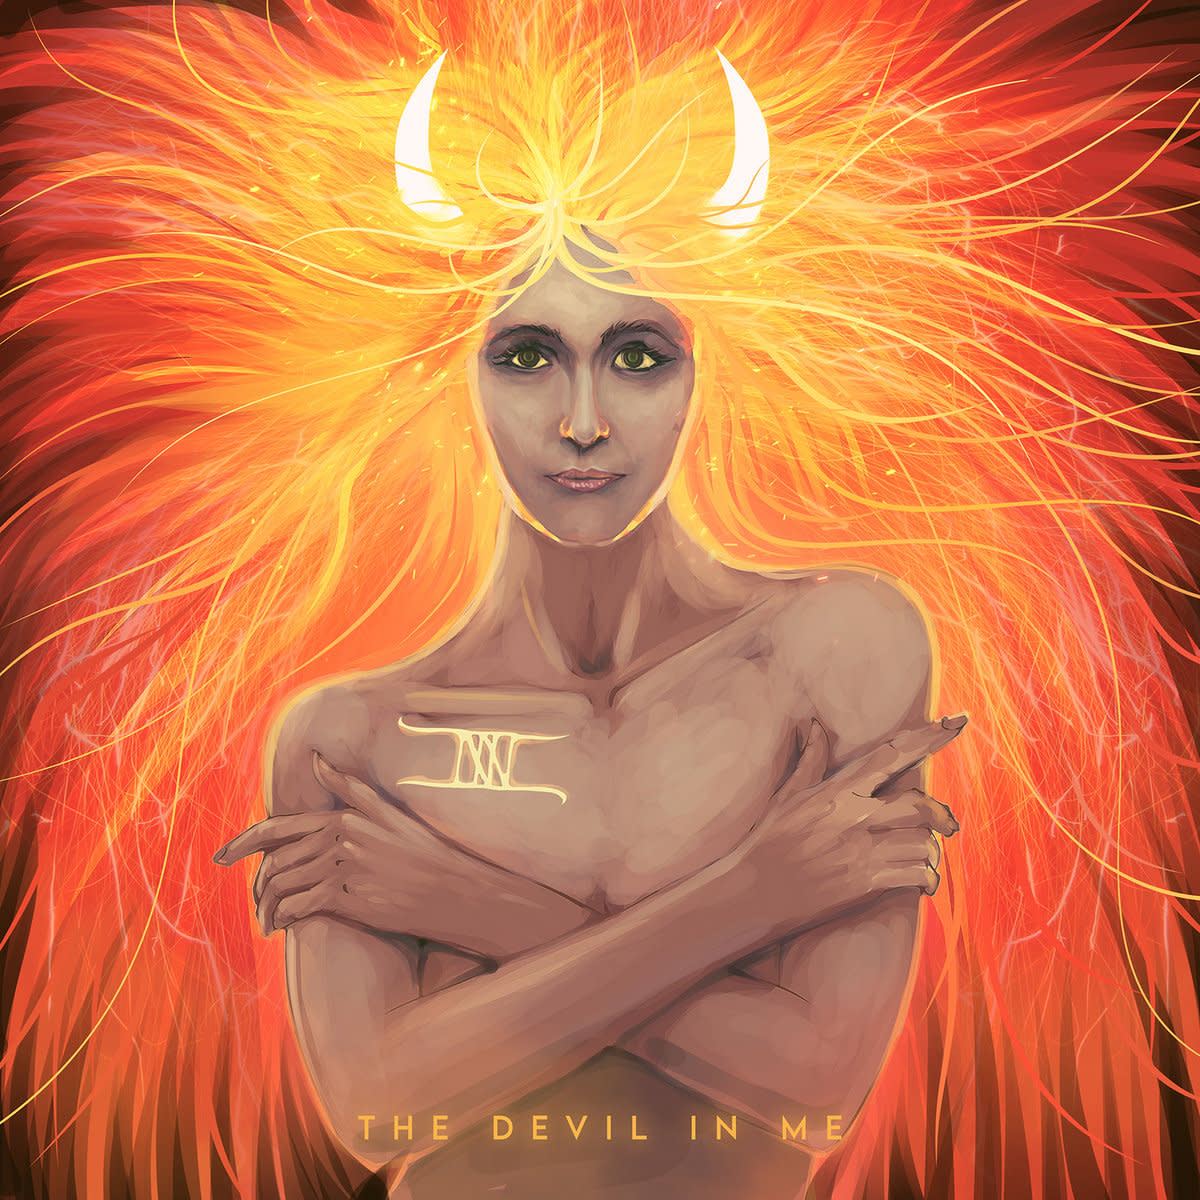 synth-single-review-the-devil-in-me-by-elyxir-connr